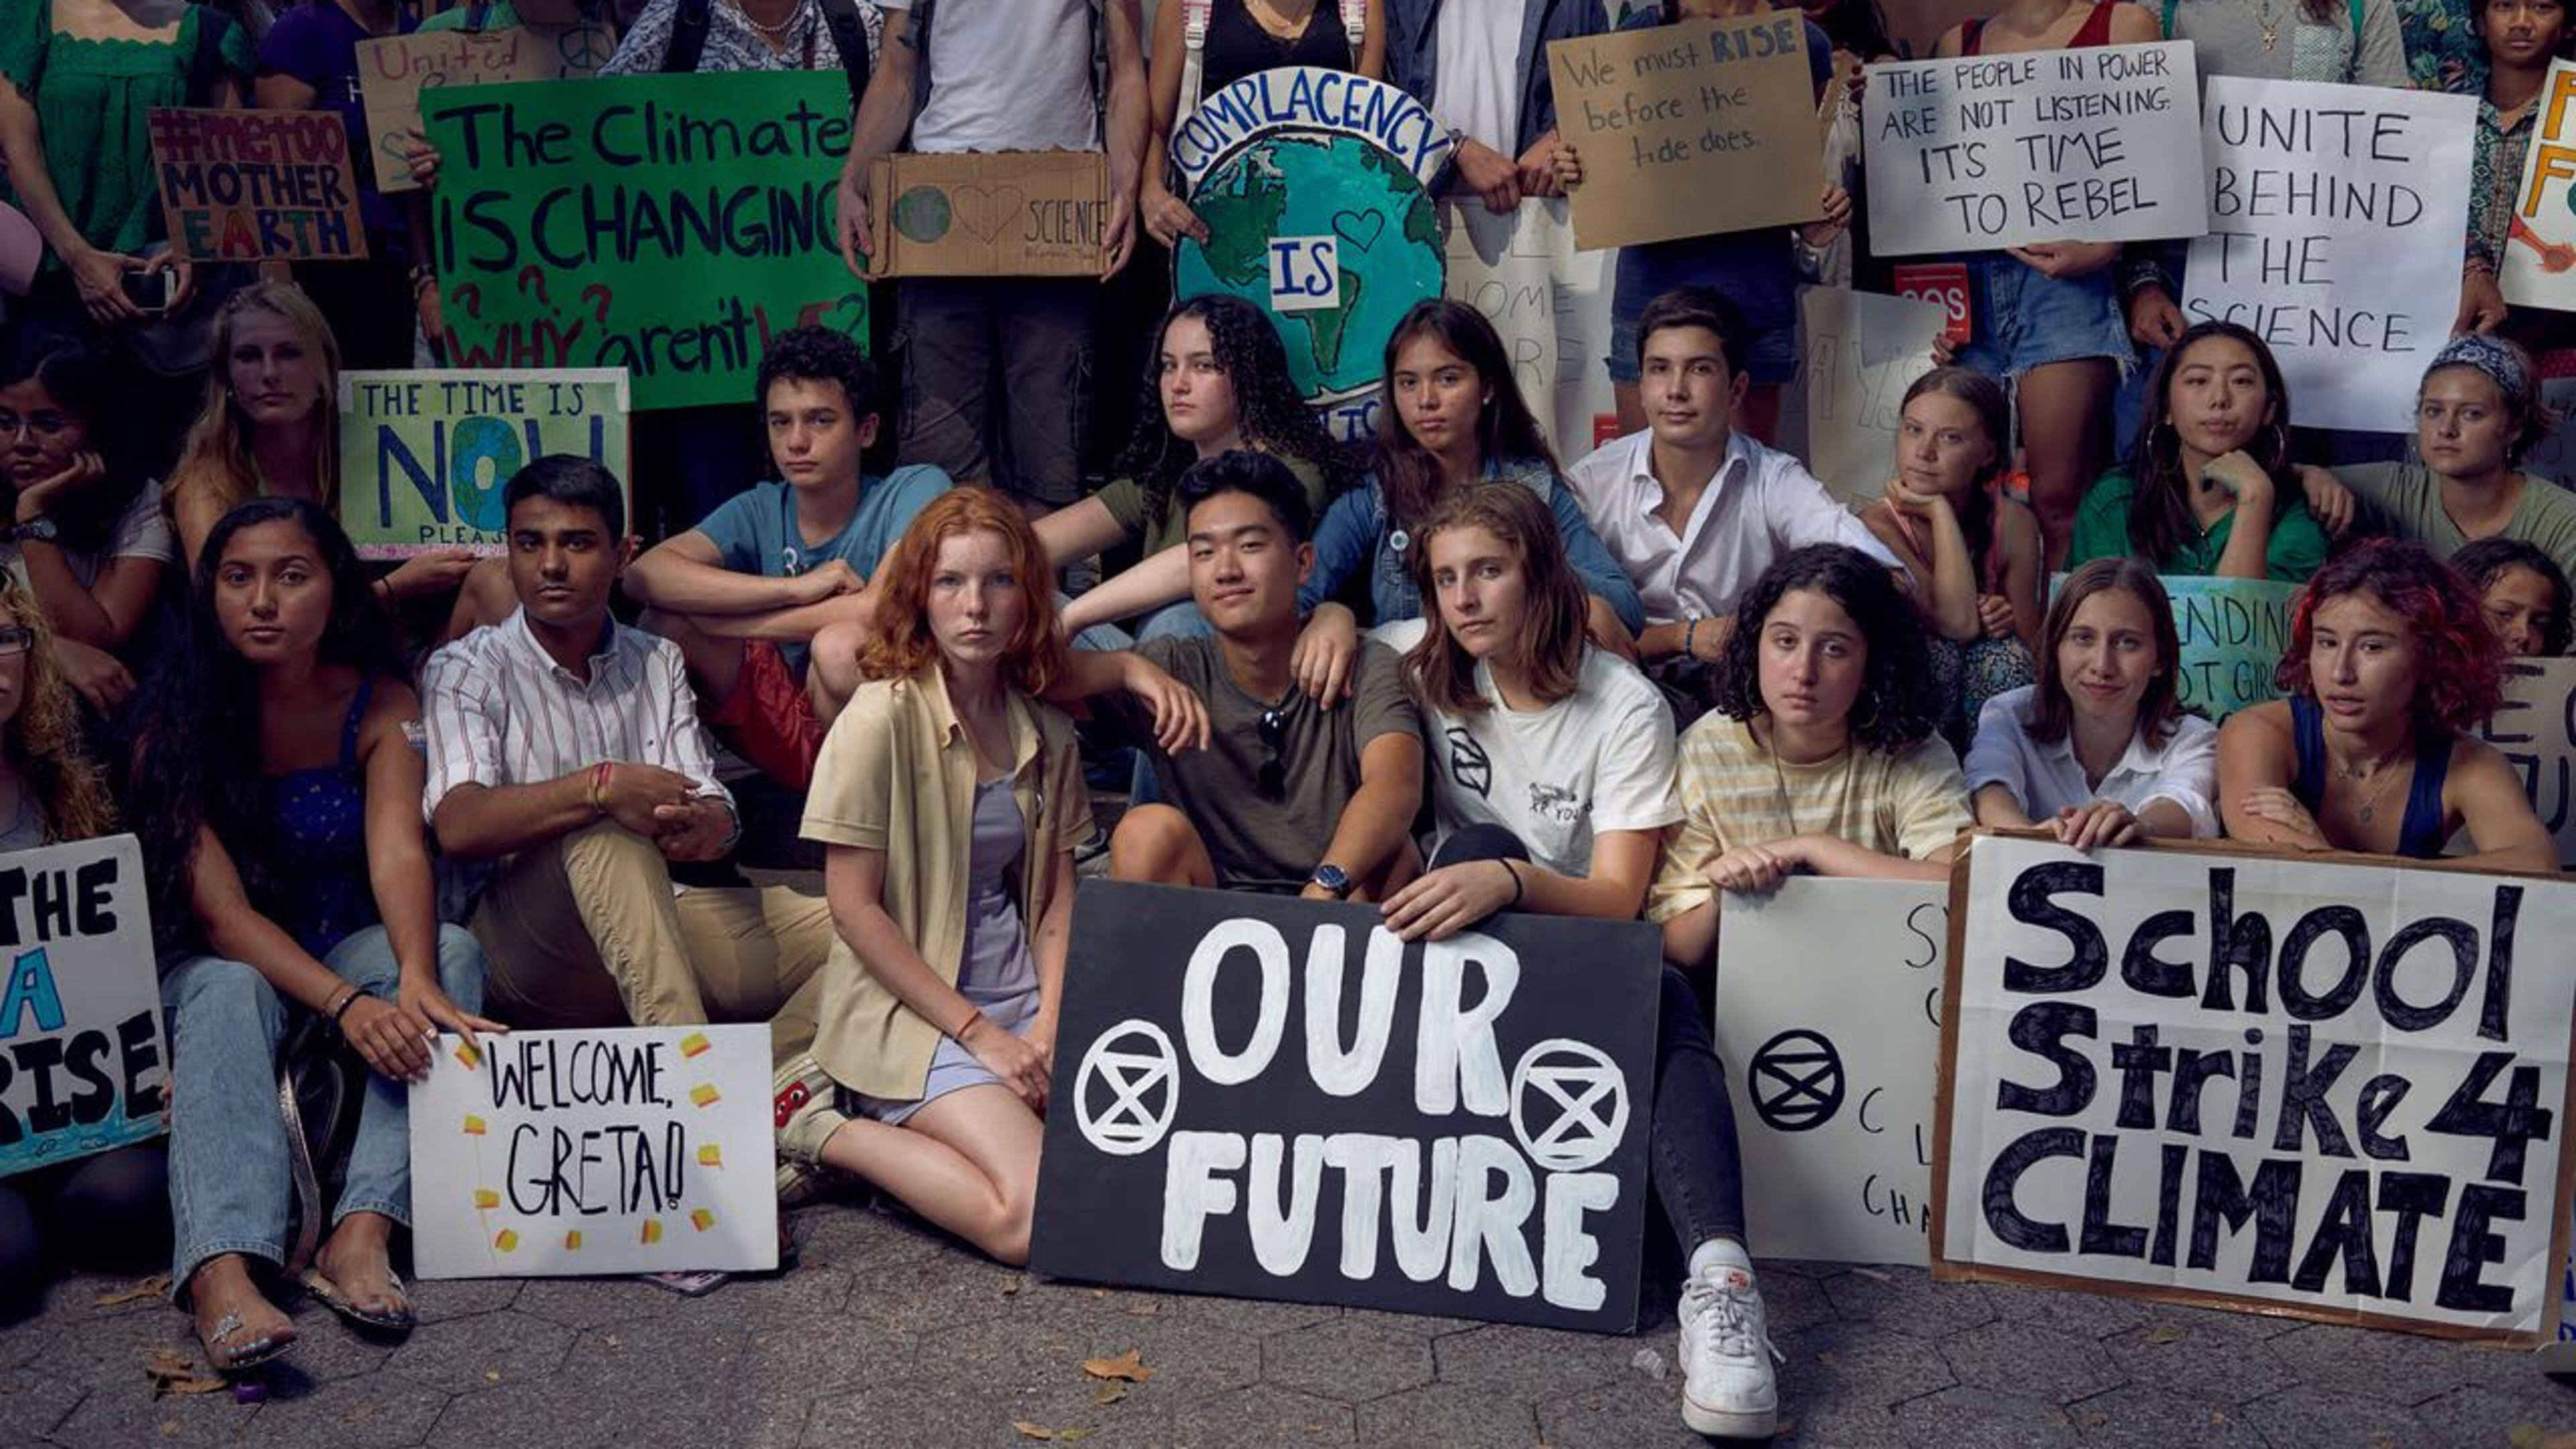 Read the demands from the upcoming climate strike